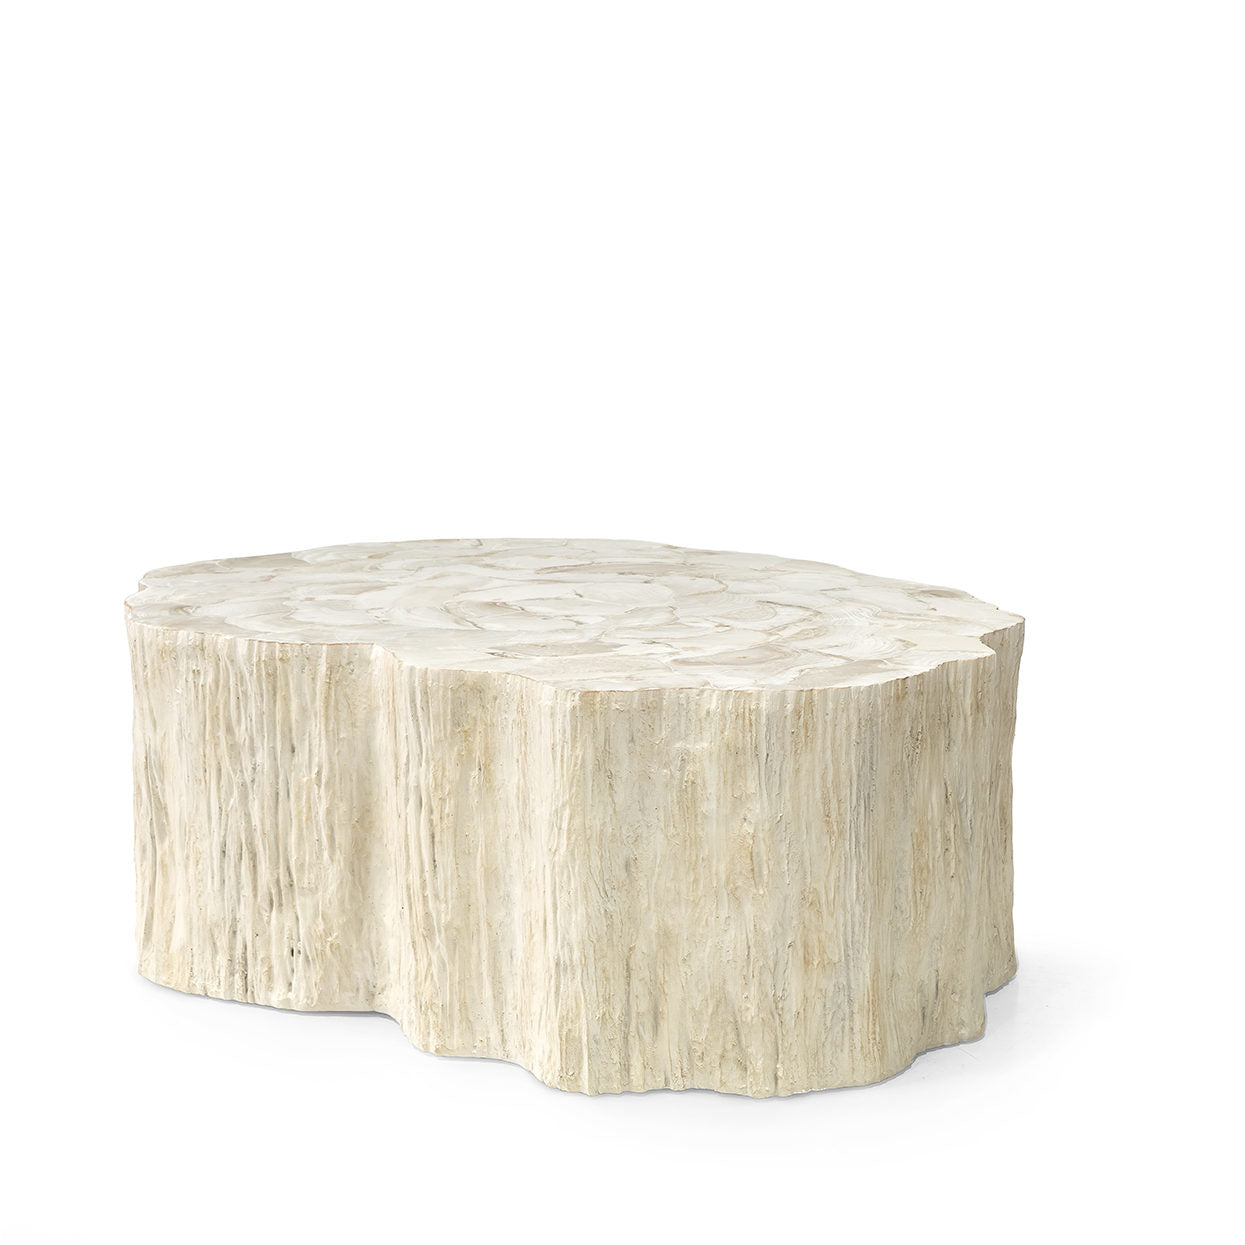 Trunk Shaped Clam Shell Coffee Table - Mecox Gardens